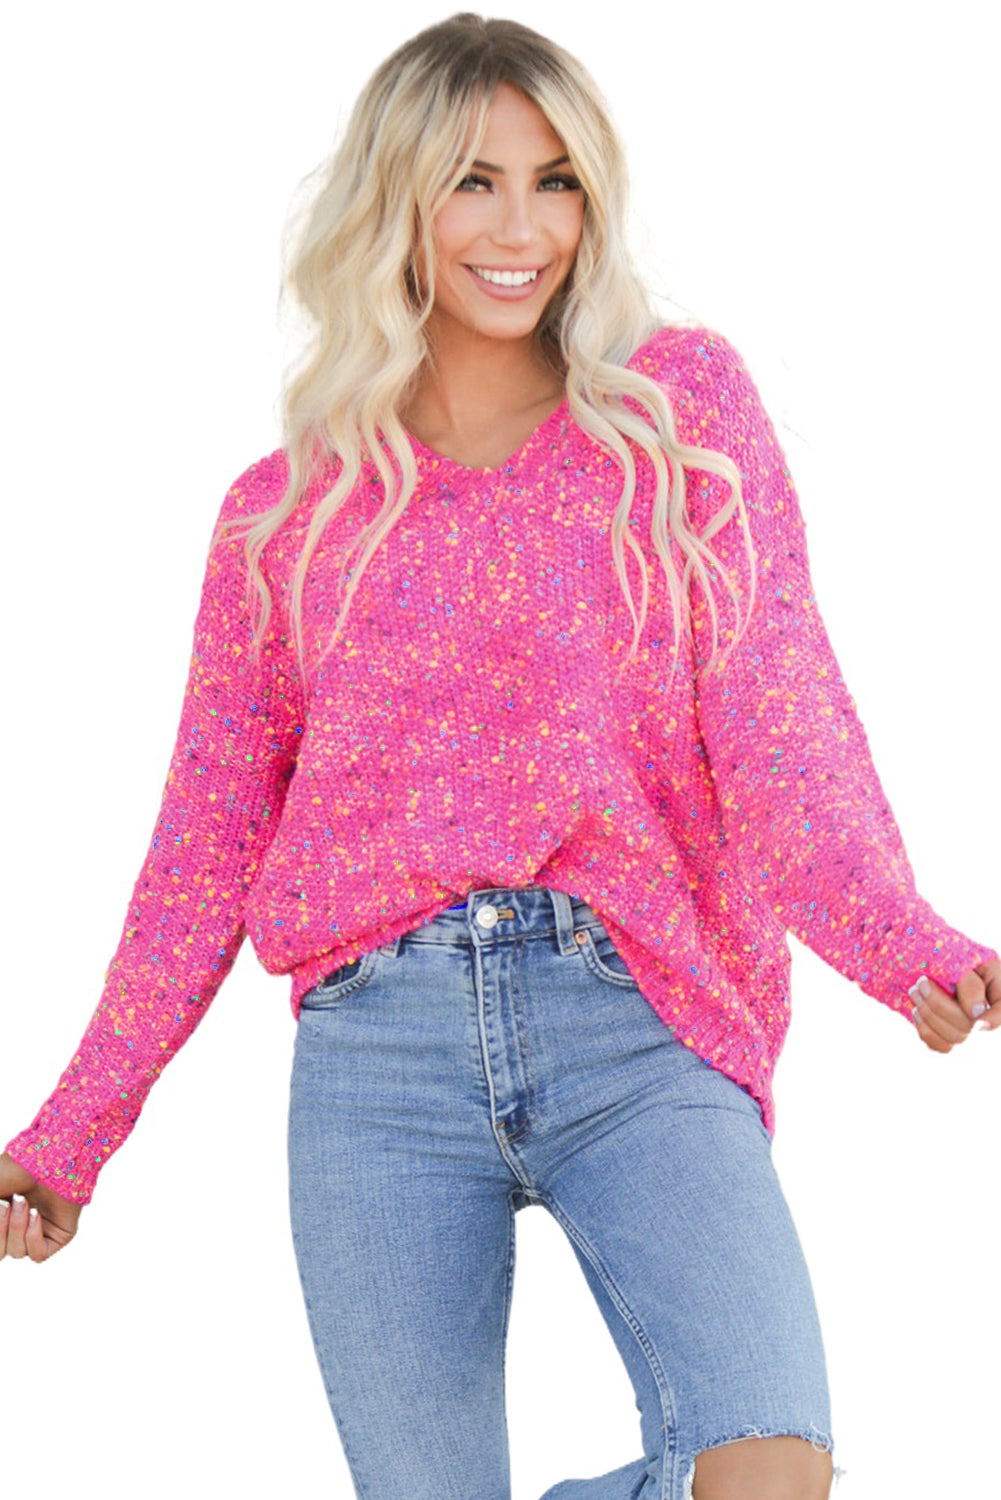 Hot Pink Mixed Color Chunky Knit Sweater